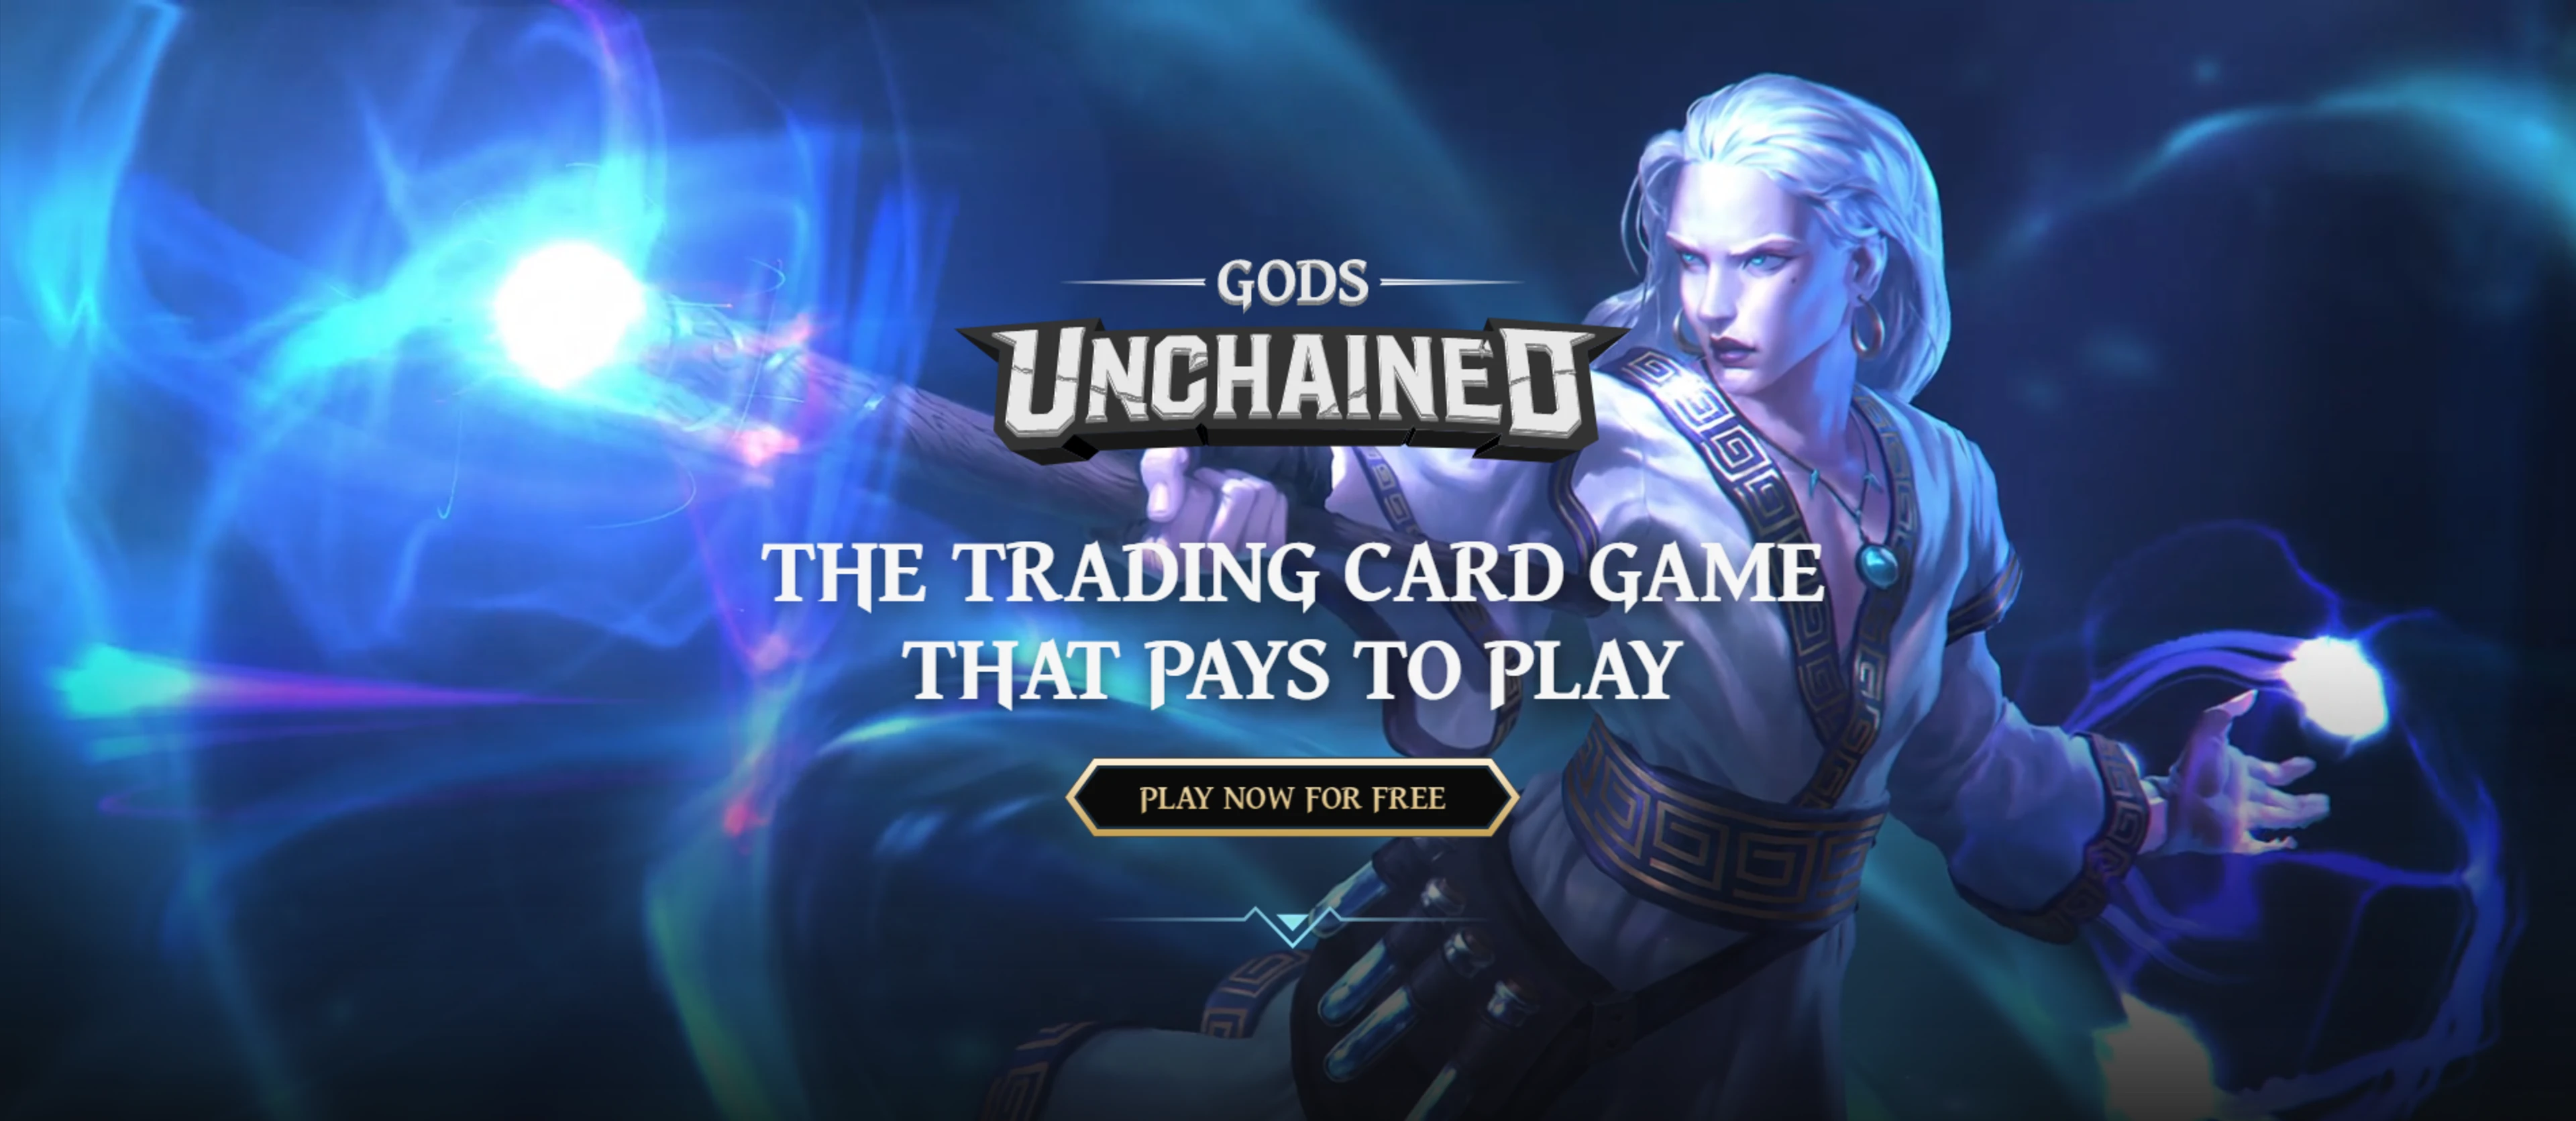 God-s Unchained 6